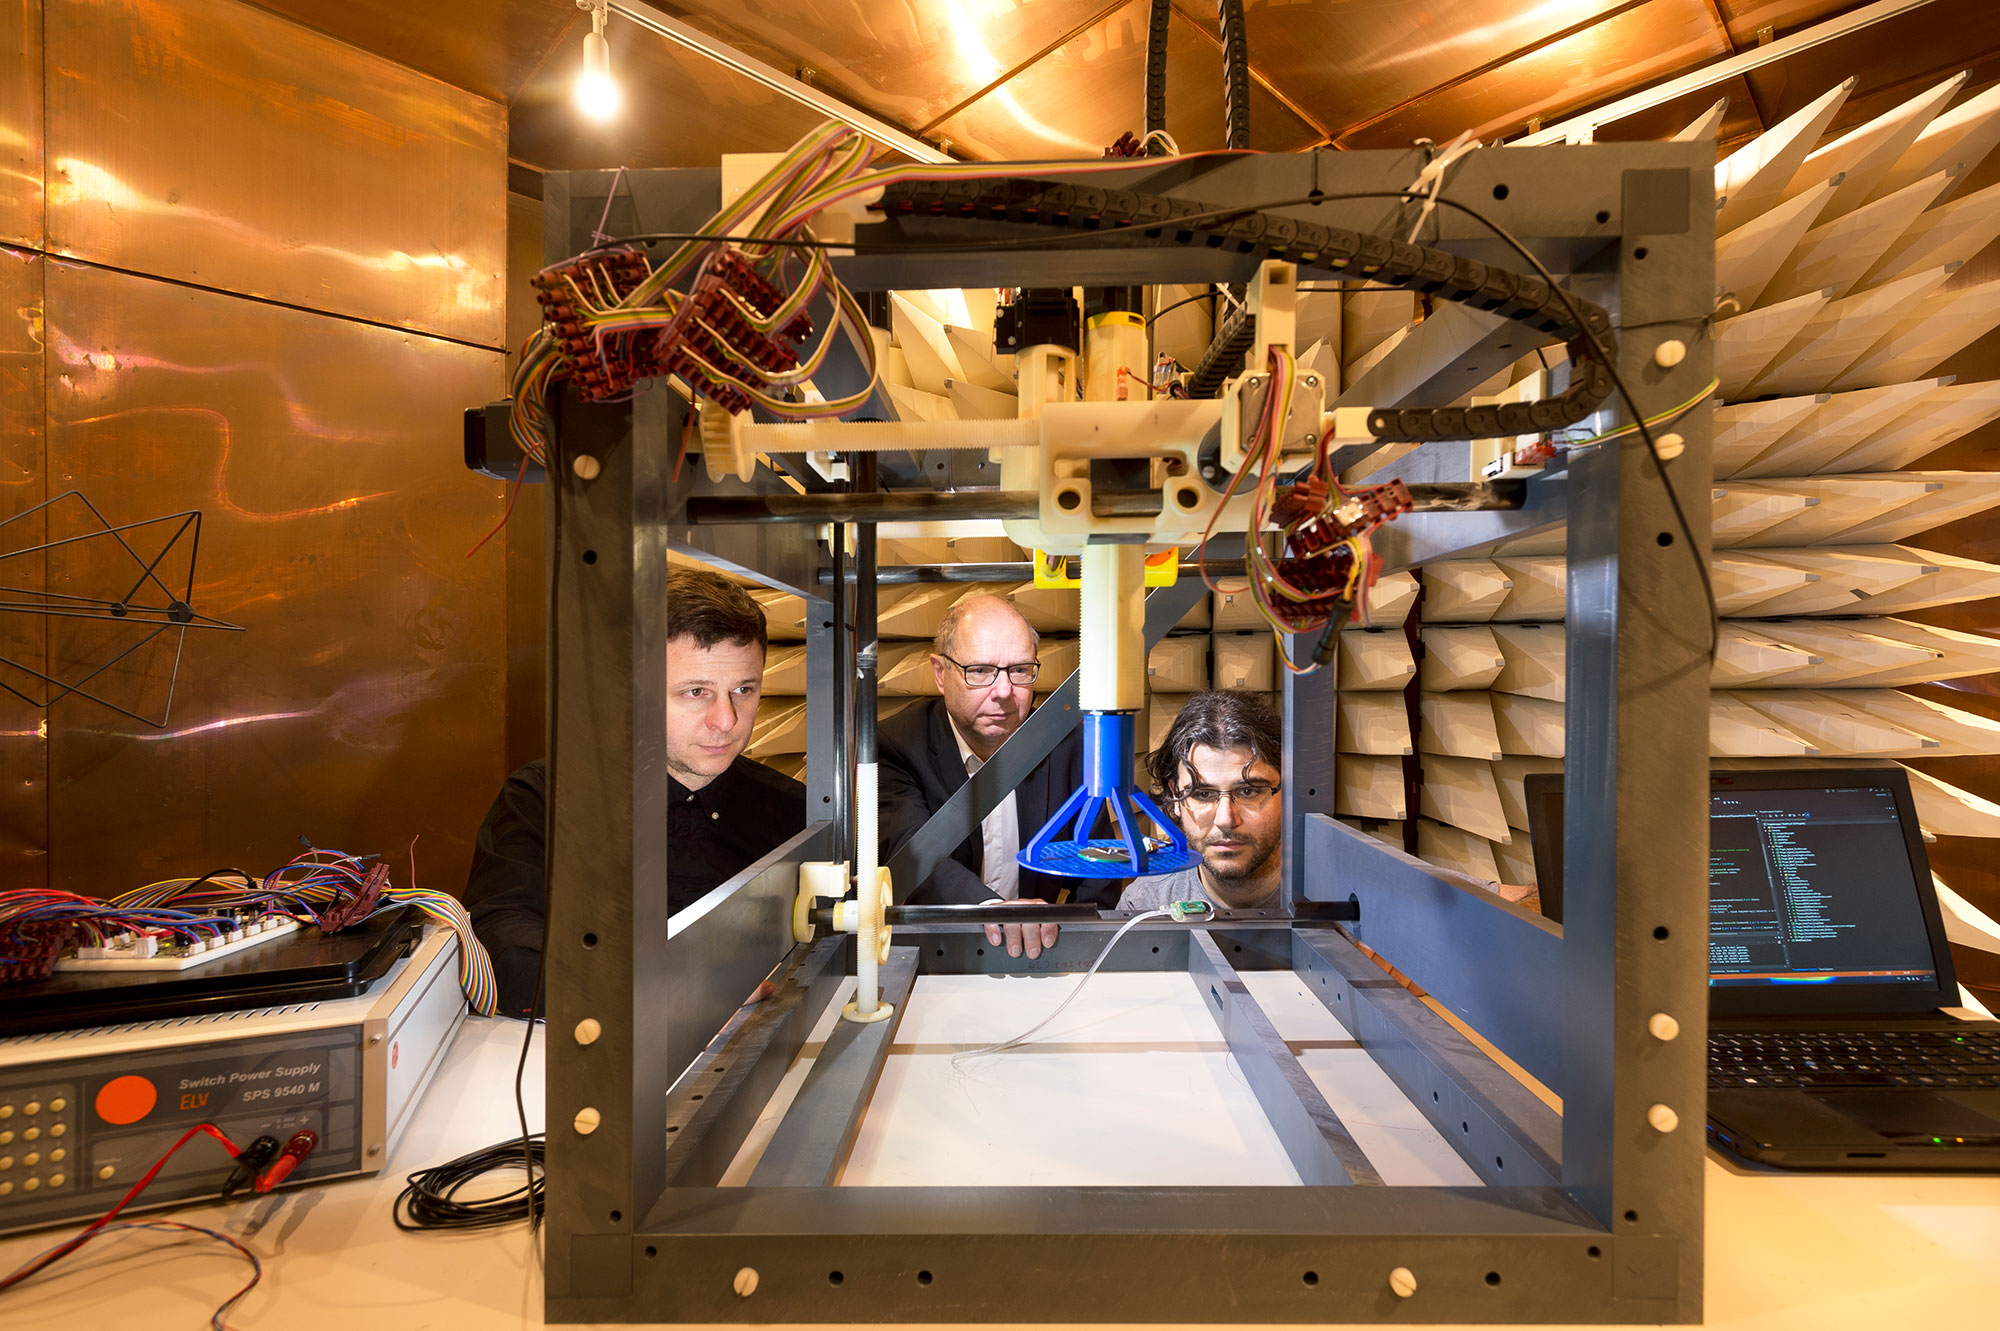 Prof. Klaus-Peter Hoffmann (center) and his team are testing wireless signal and power transmission for theranostic implants in a specially isolated room.